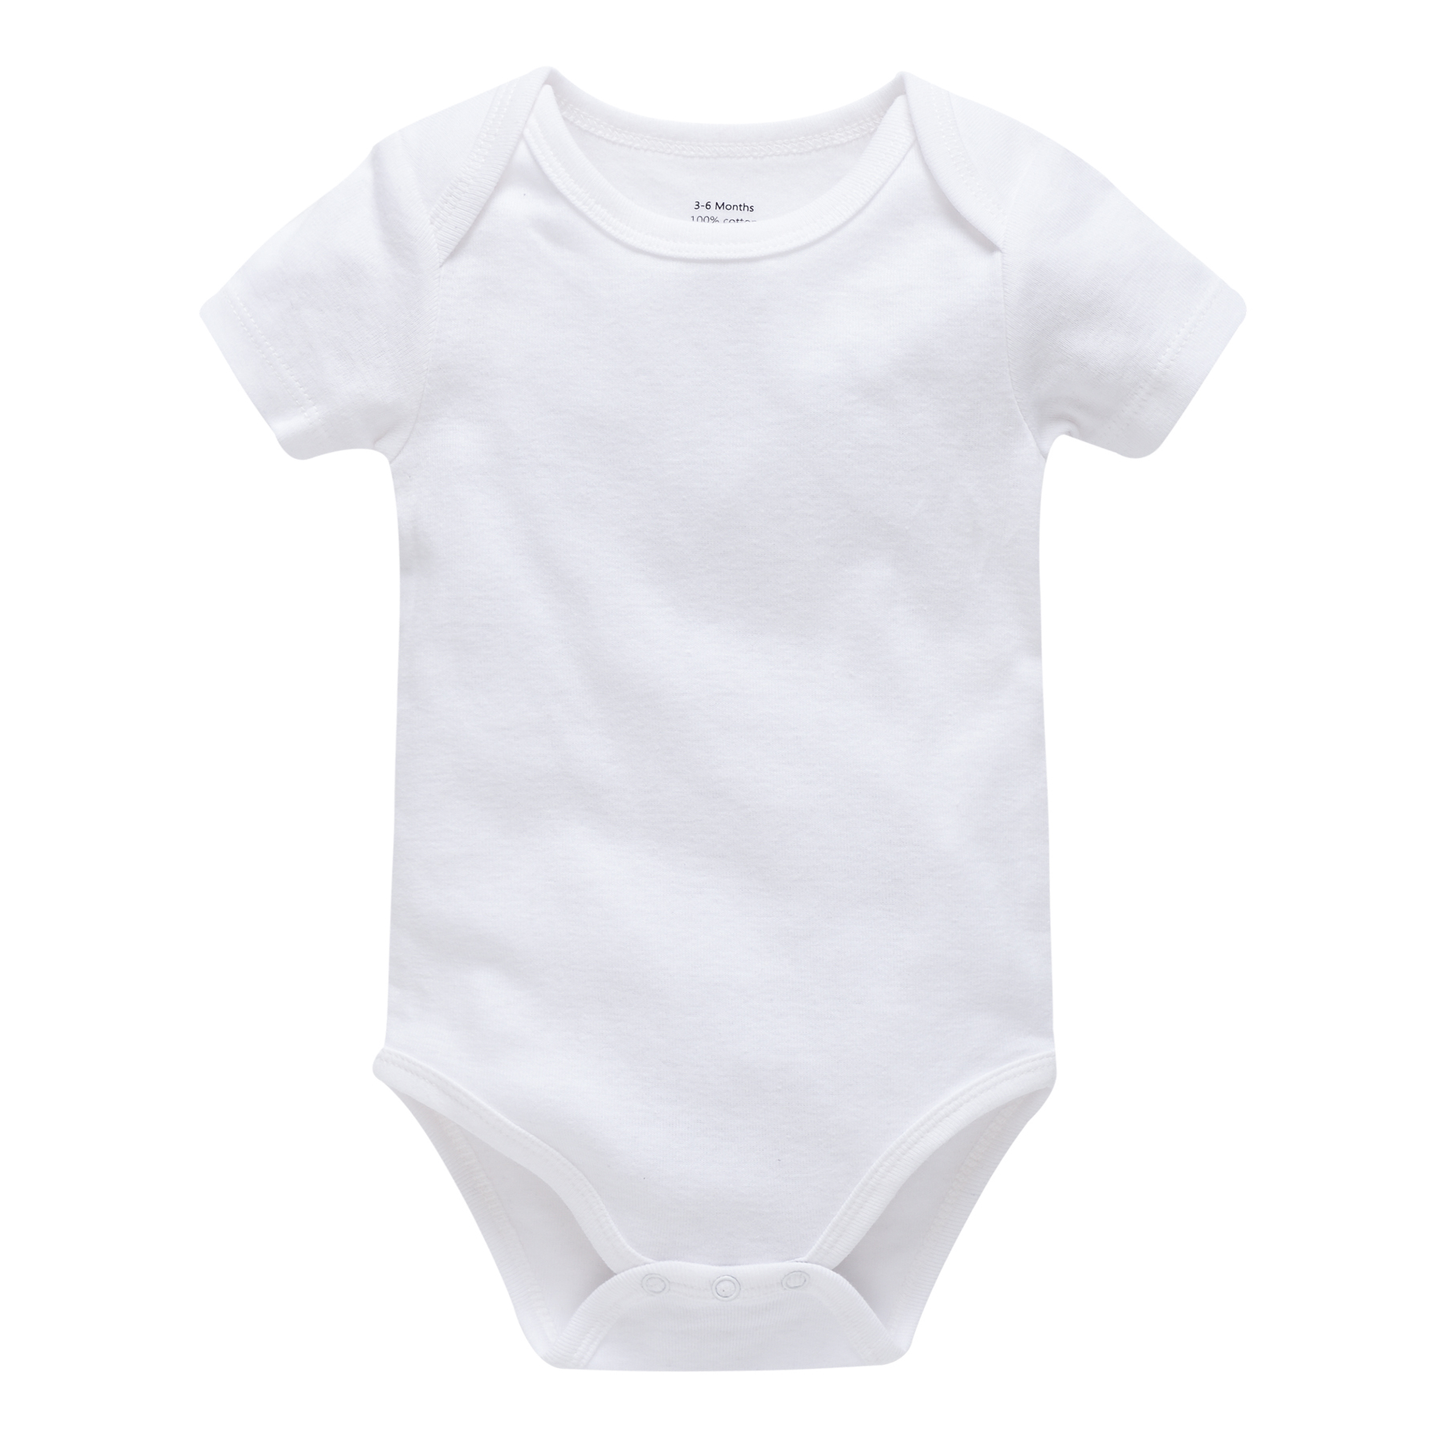 baby body white at titchytastic.com